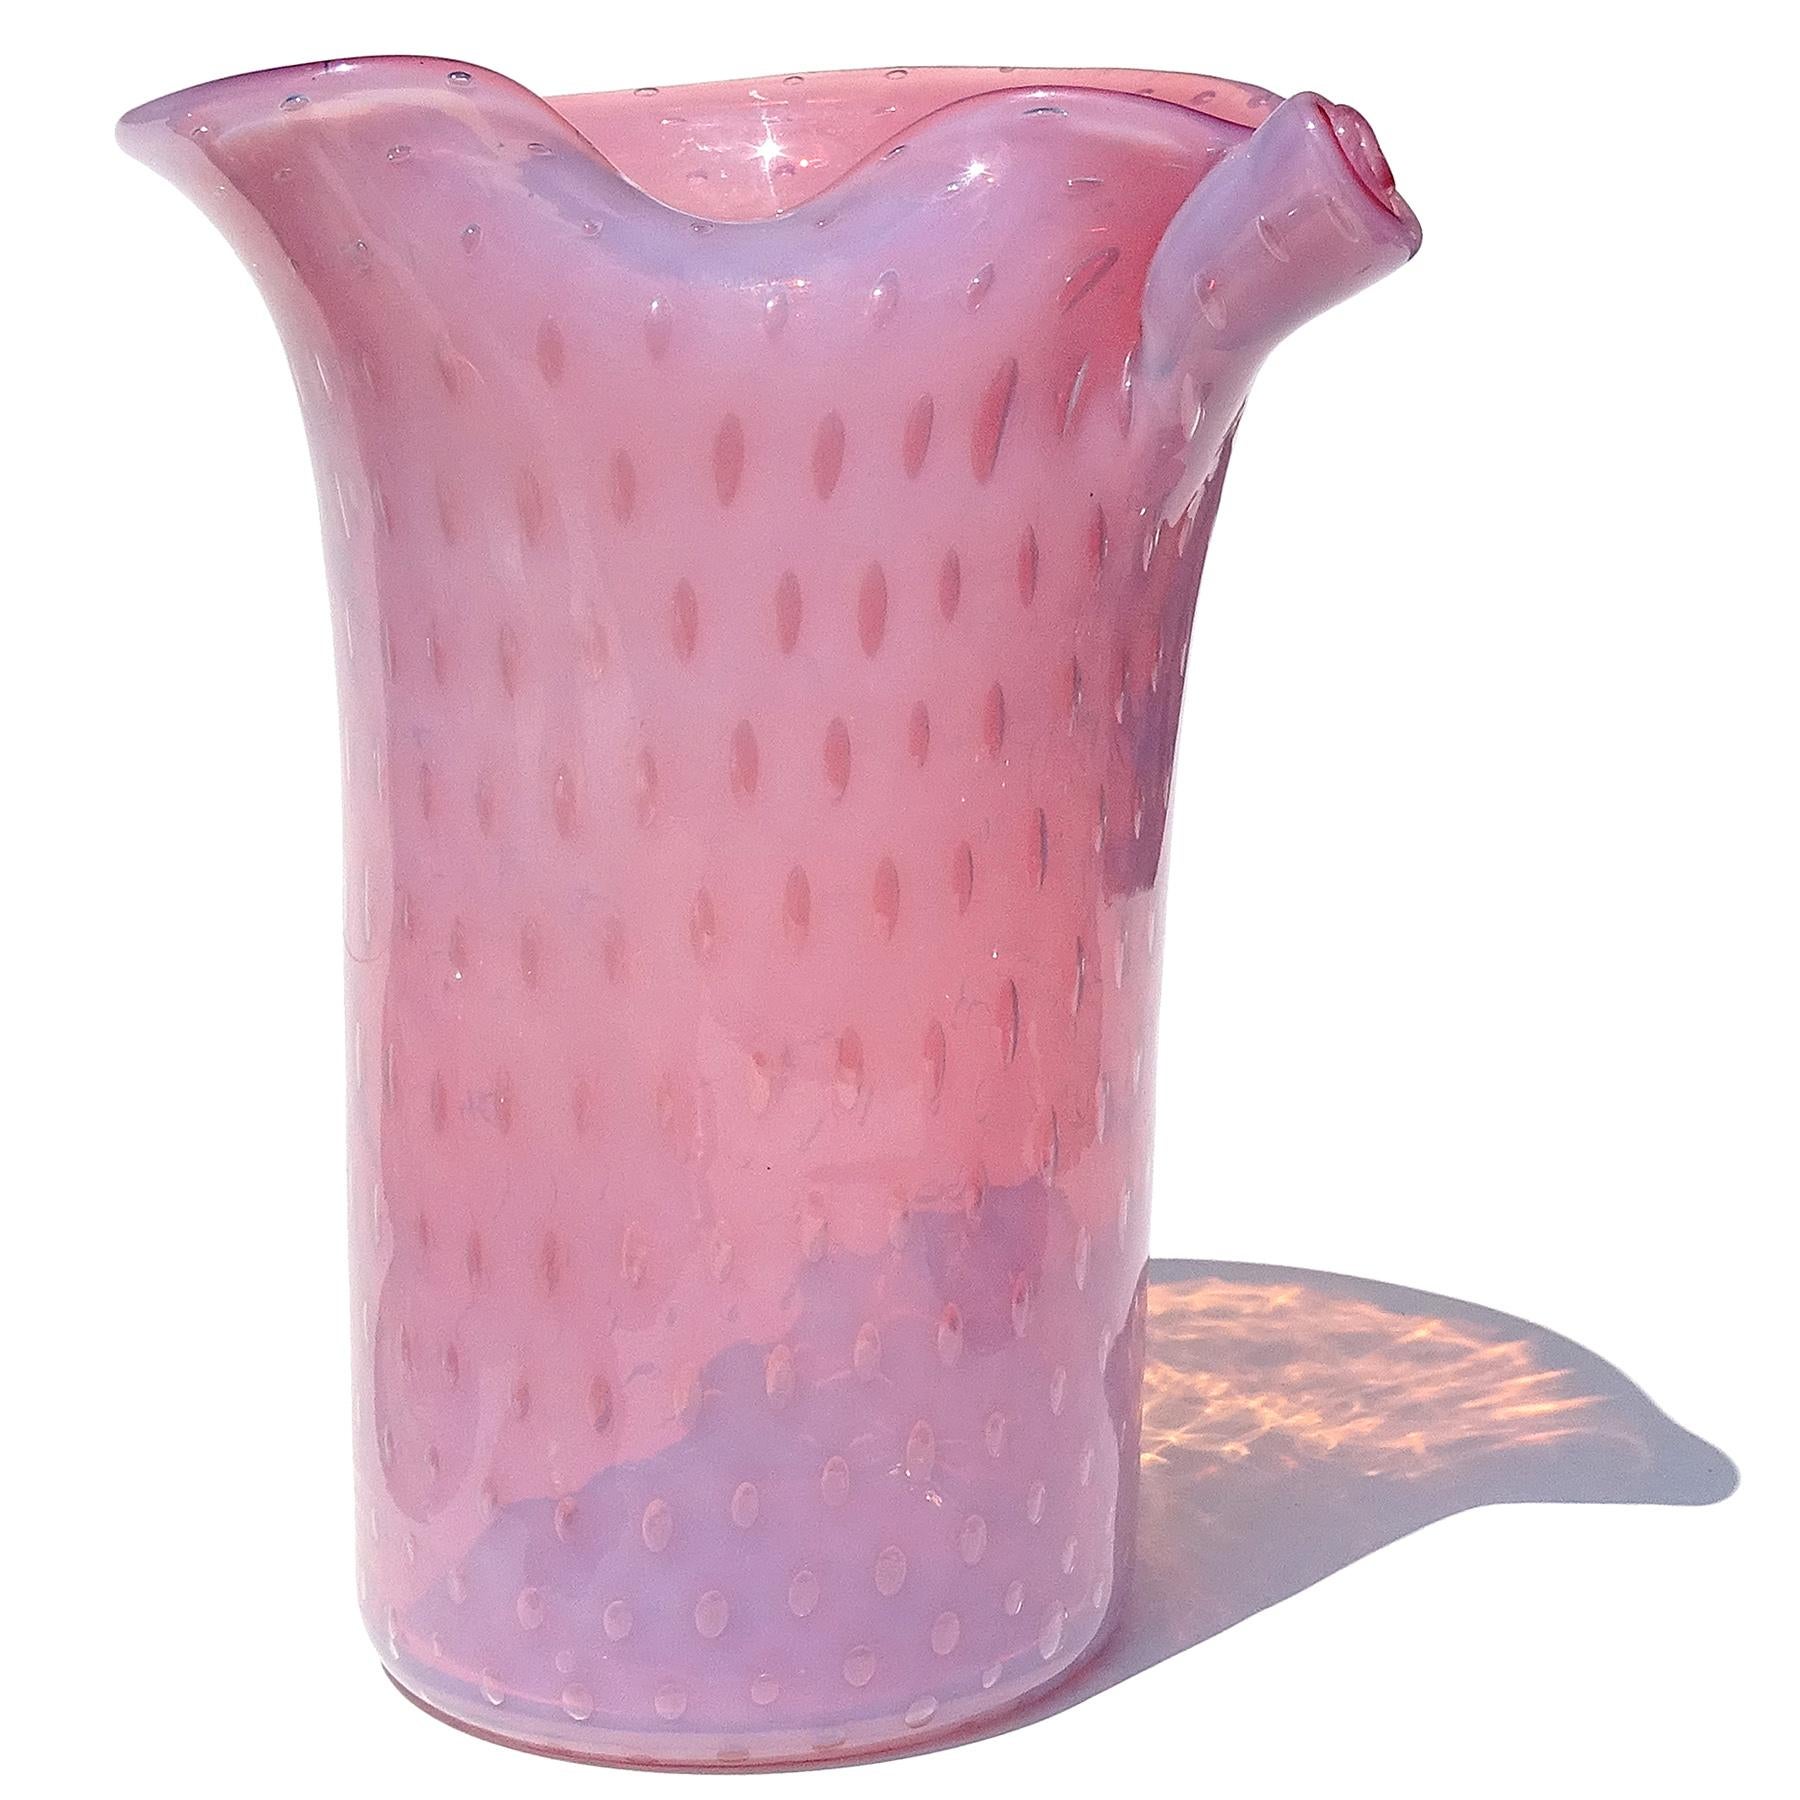 Beautiful vintage Murano hand blown opalescent pink and controlled bubbles Italian art glass flower vase. Documented to the Fratelli Toso company. It still retains an original label. There is a slightly worn 